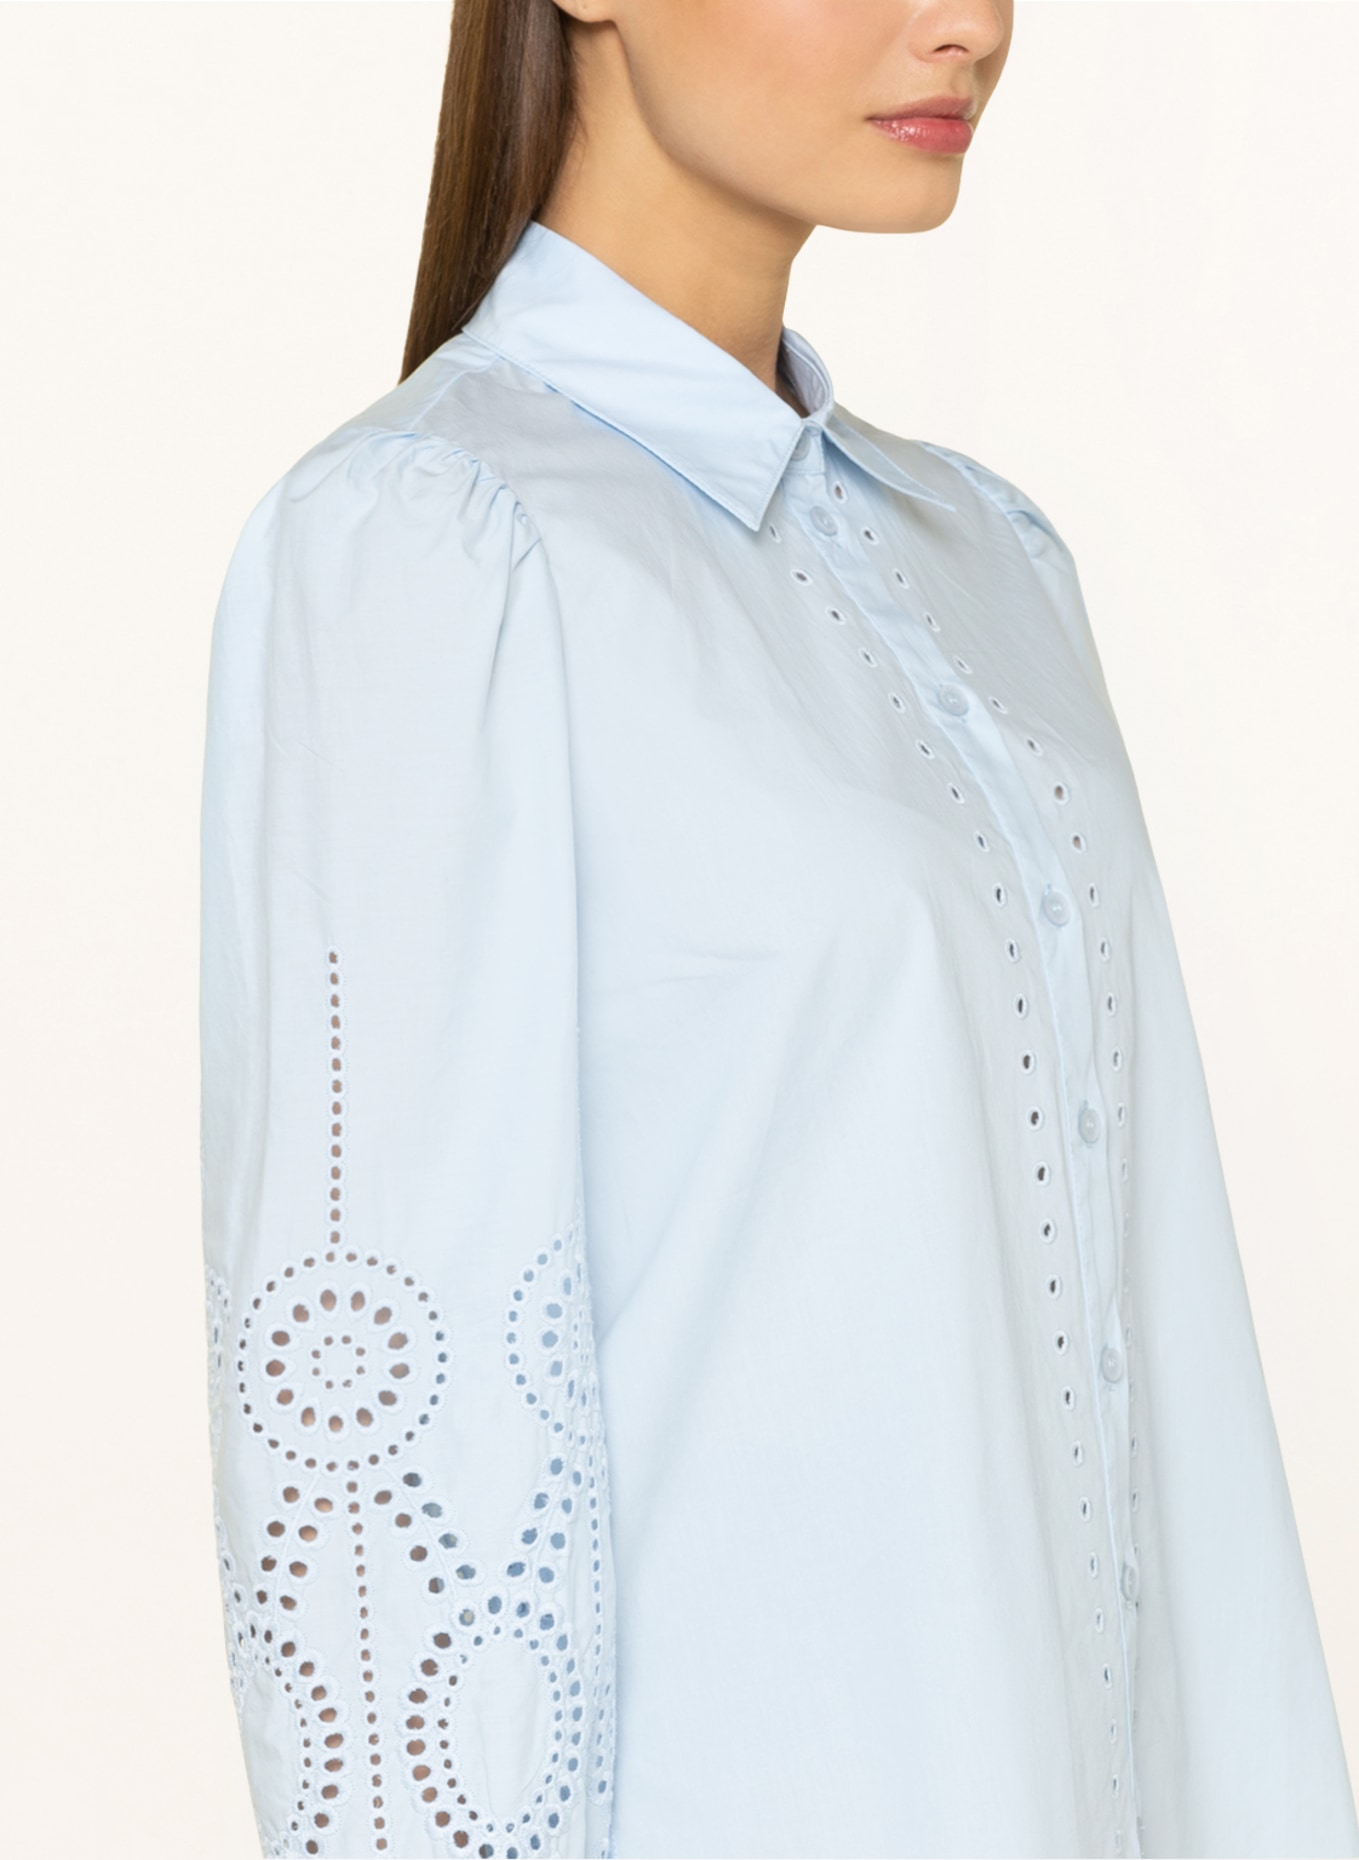 RIANI Shirt blouse with broderie anglaise, Color: LIGHT BLUE (Image 4)